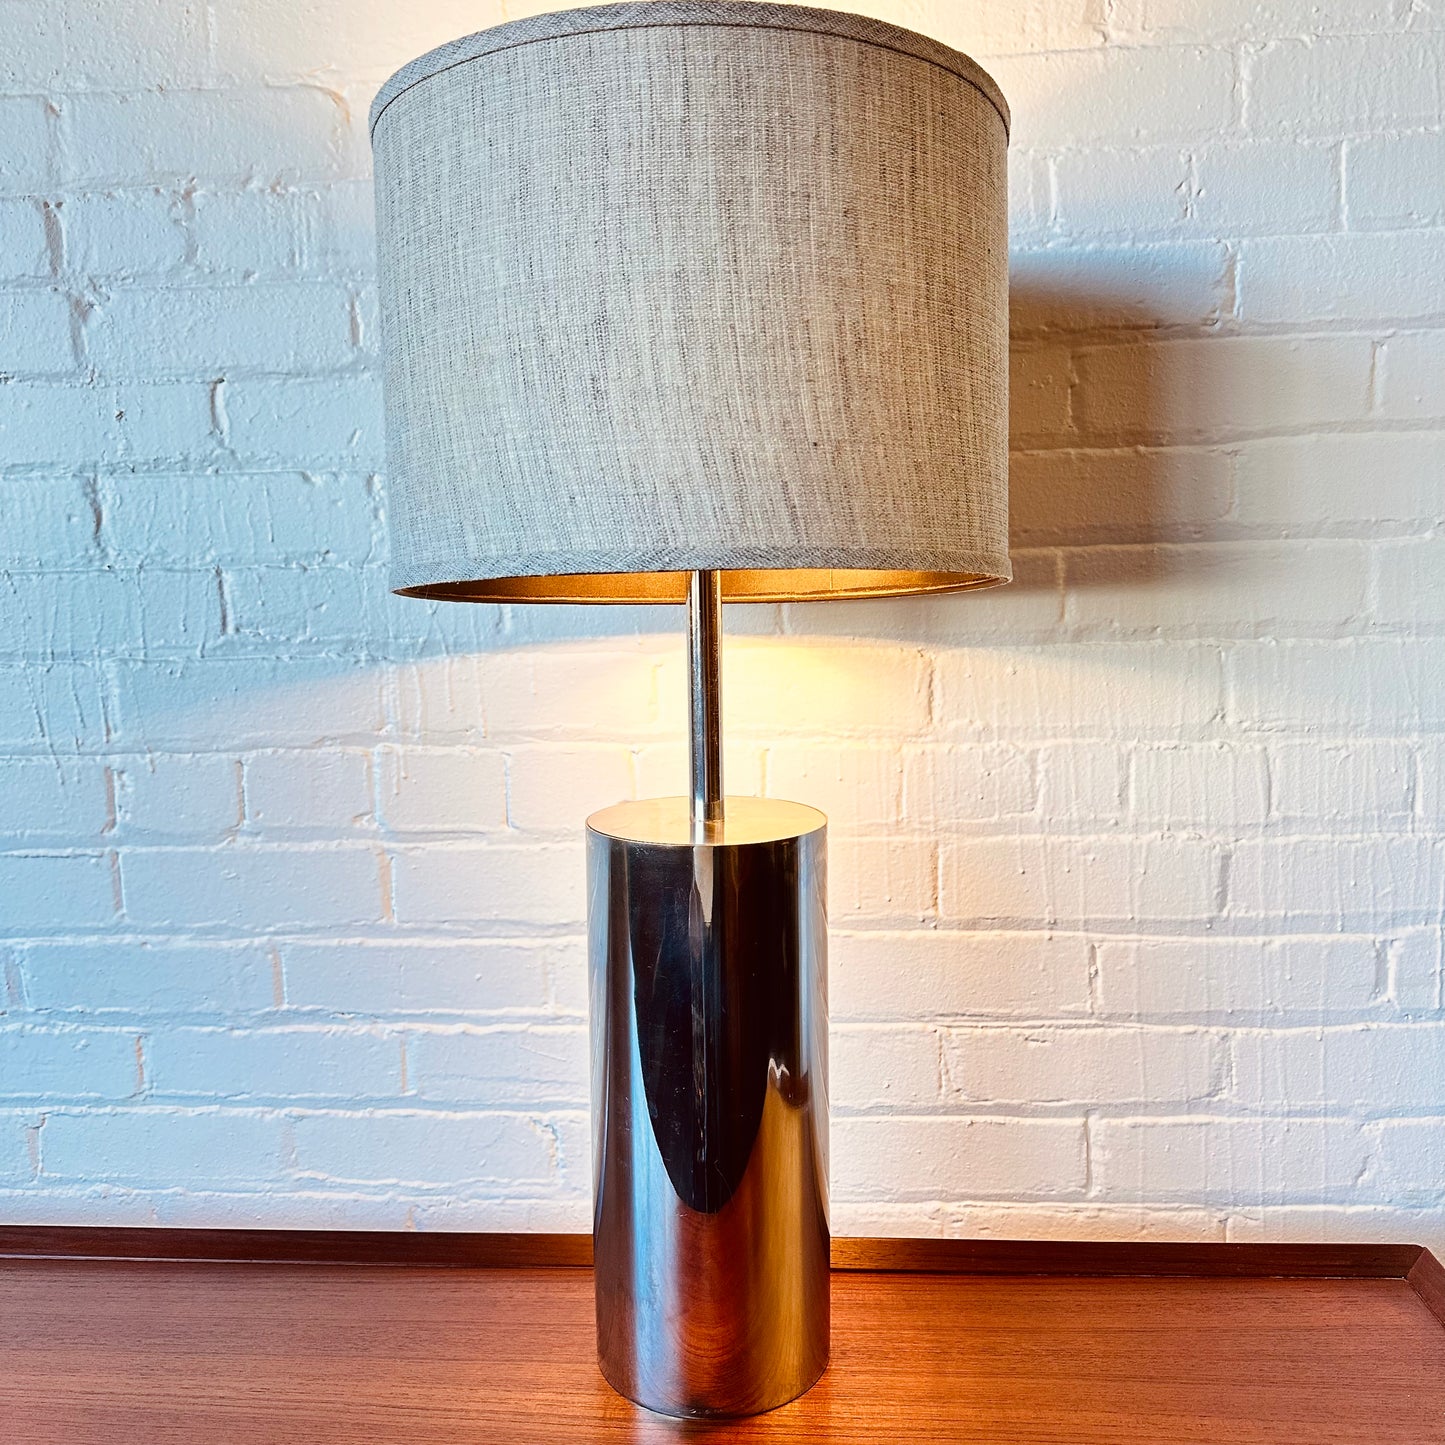 THREE LIGHT CYLINDRICAL TABLE LAMP BY GOFFREDO REGGIANI